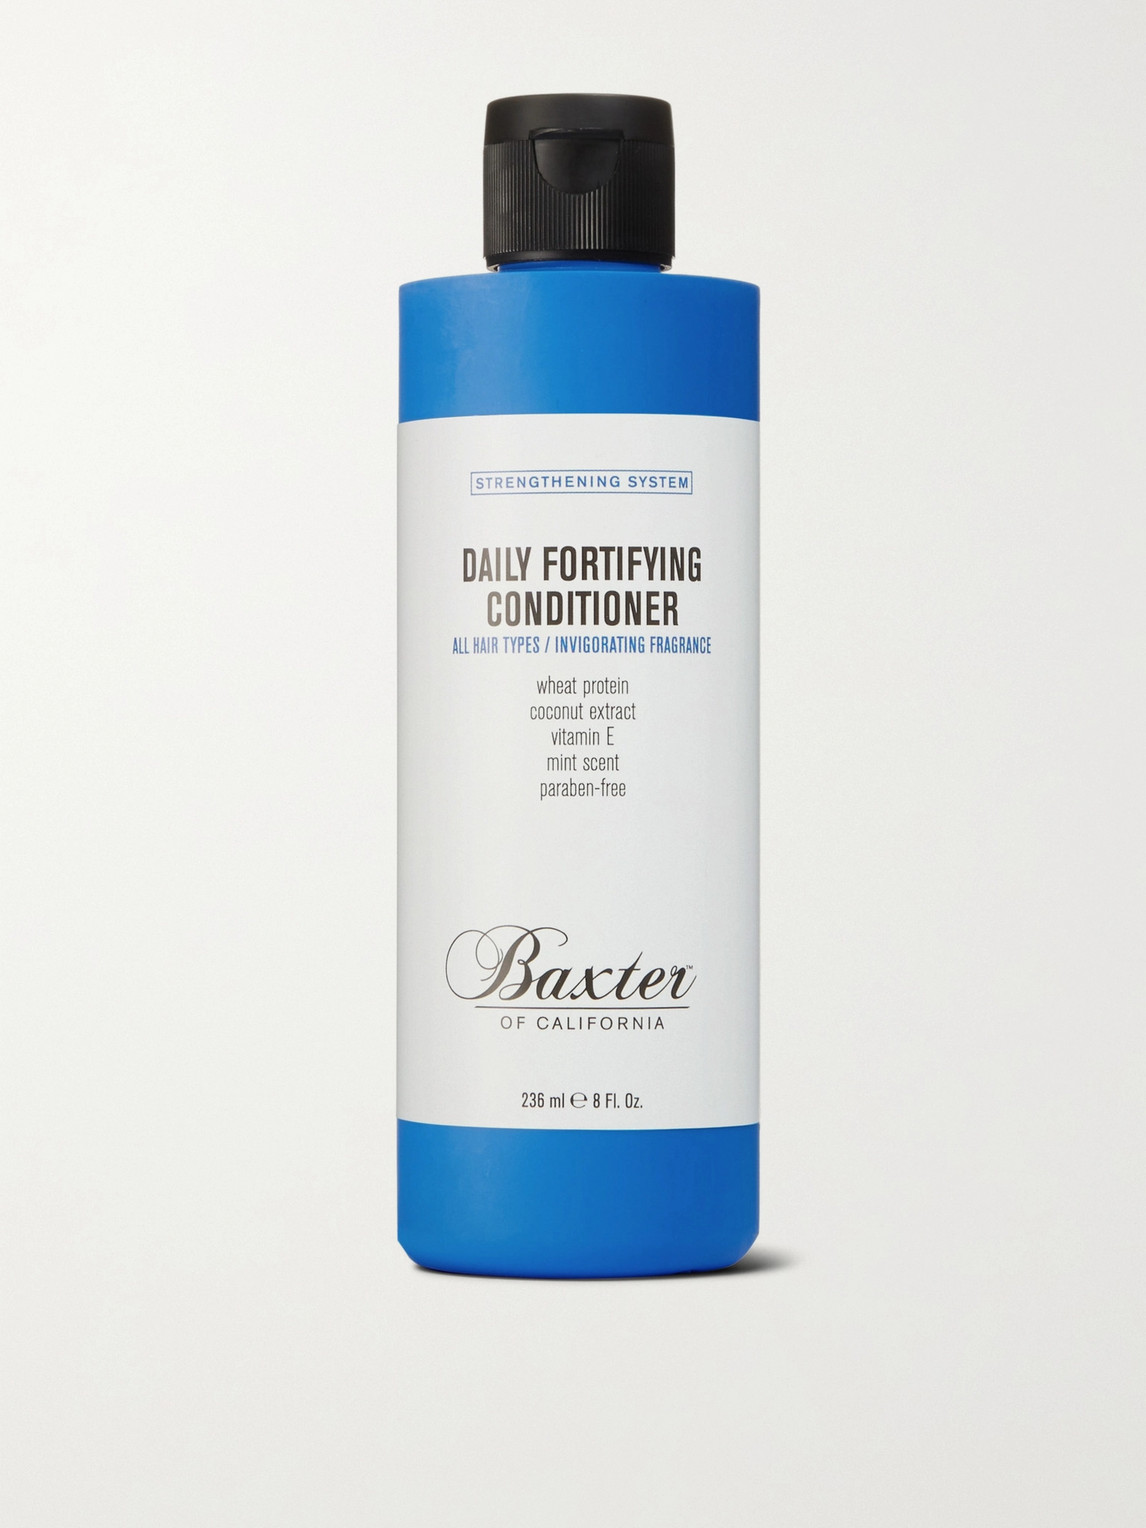 BAXTER OF CALIFORNIA DAILY FORTIFYING CONDITIONER, 236ML